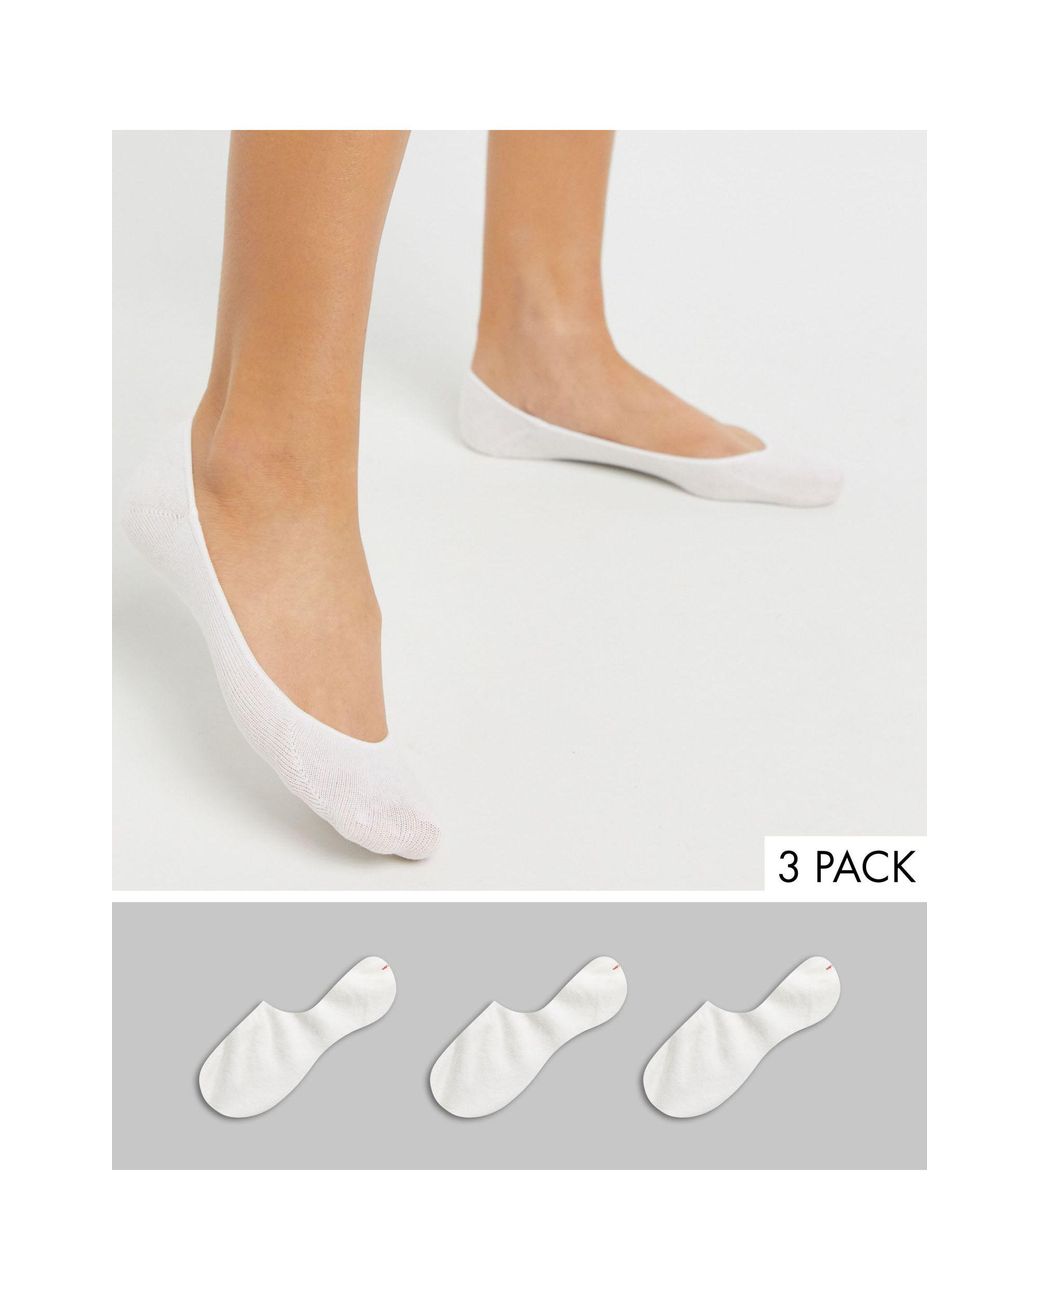 Monki Cotton 3 Pack Invisible Footsie Socks in White - Lyst